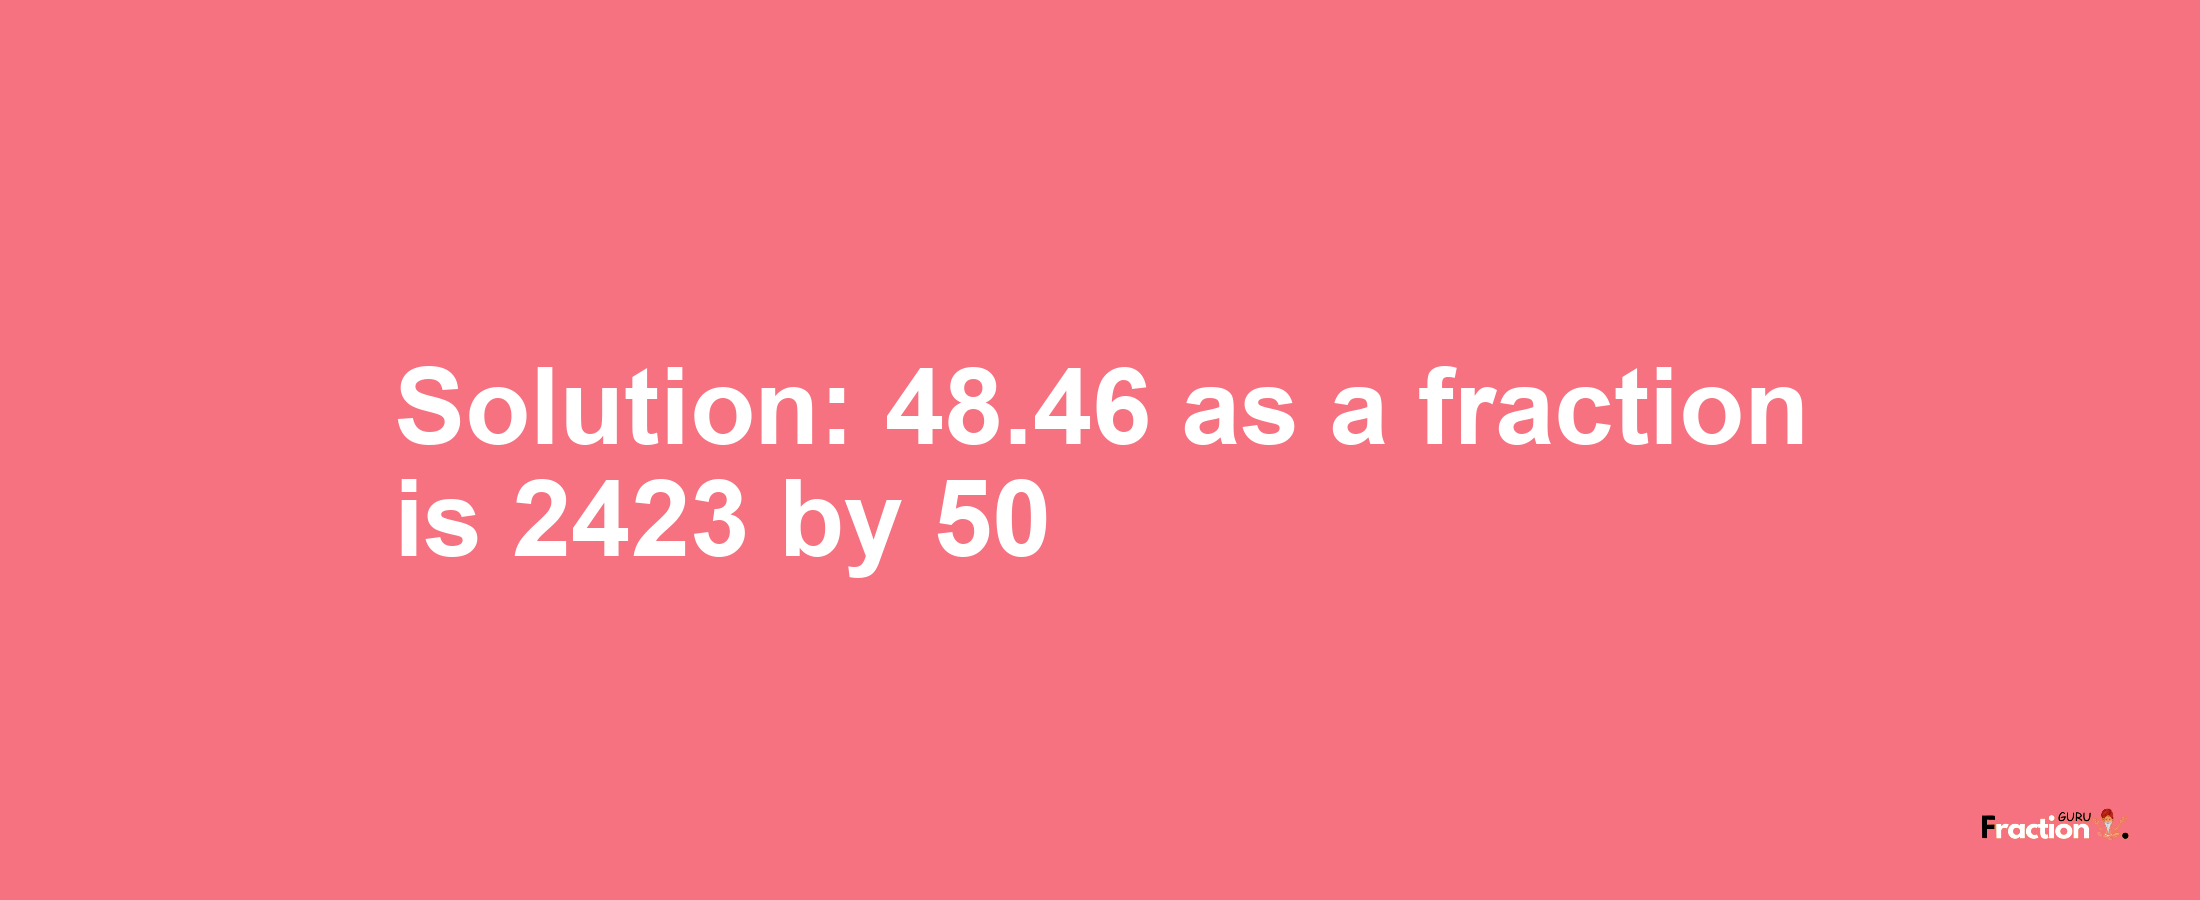 Solution:48.46 as a fraction is 2423/50